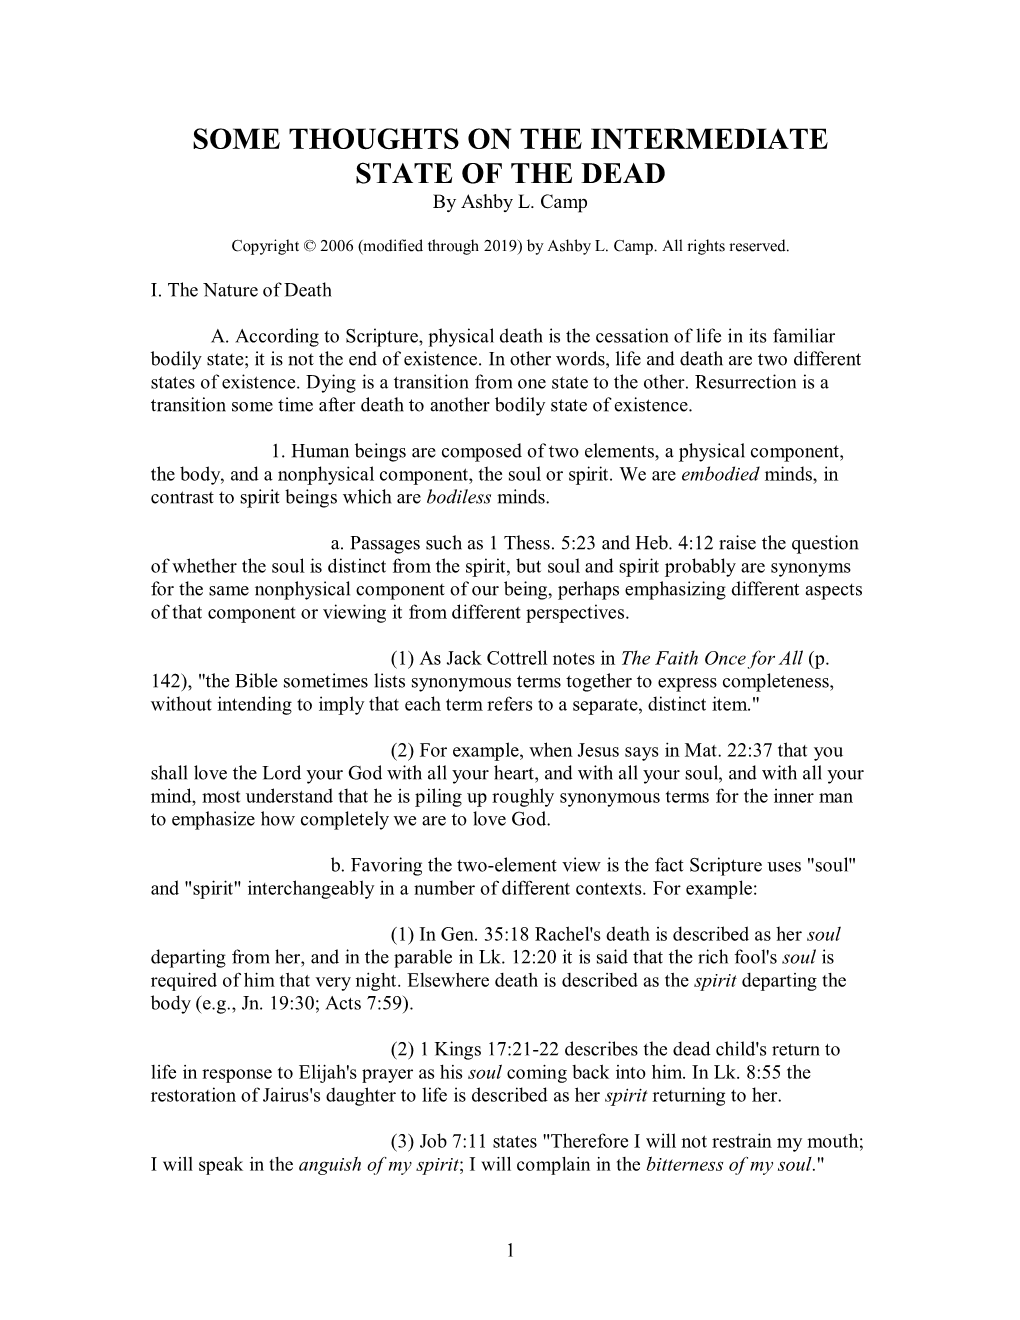 SOME THOUGHTS on the INTERMEDIATE STATE of the DEAD by Ashby L